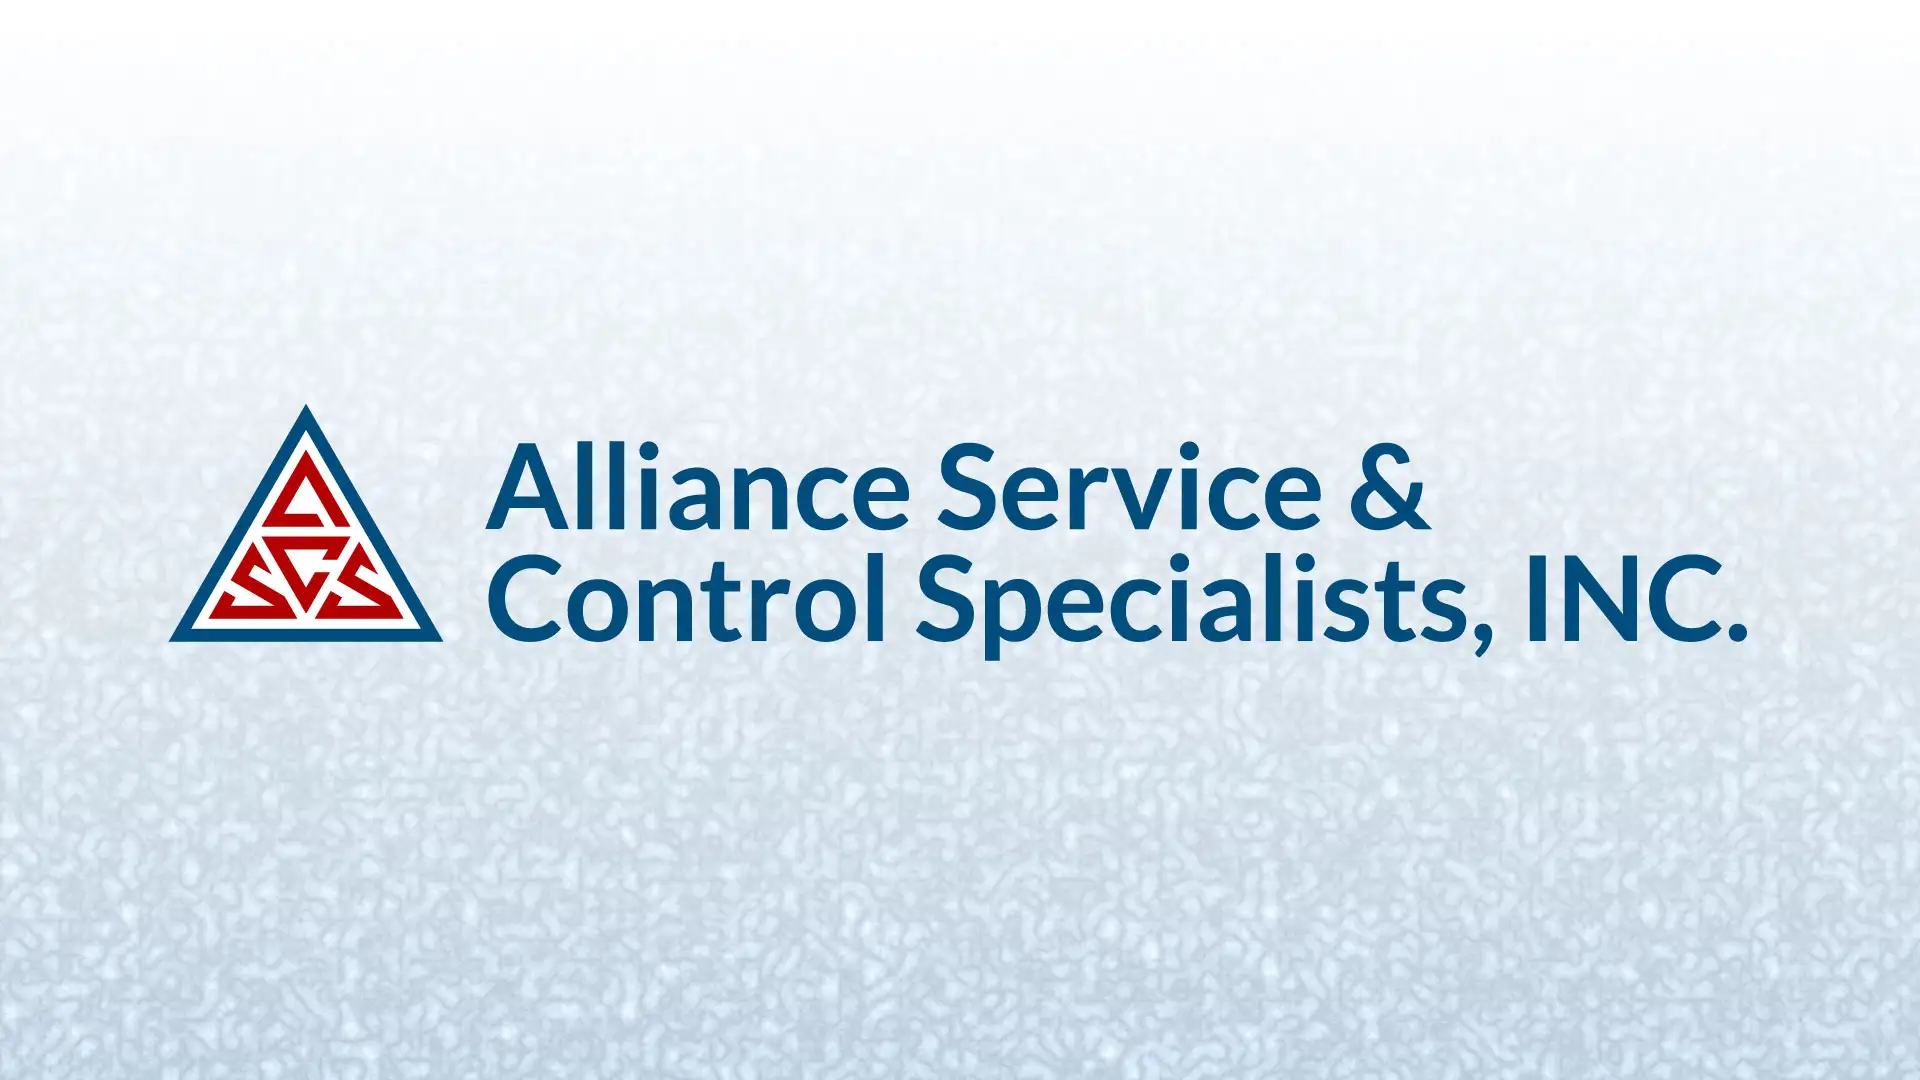 Alliance Service & Control Specialists logo rebrand by Dusty Drake